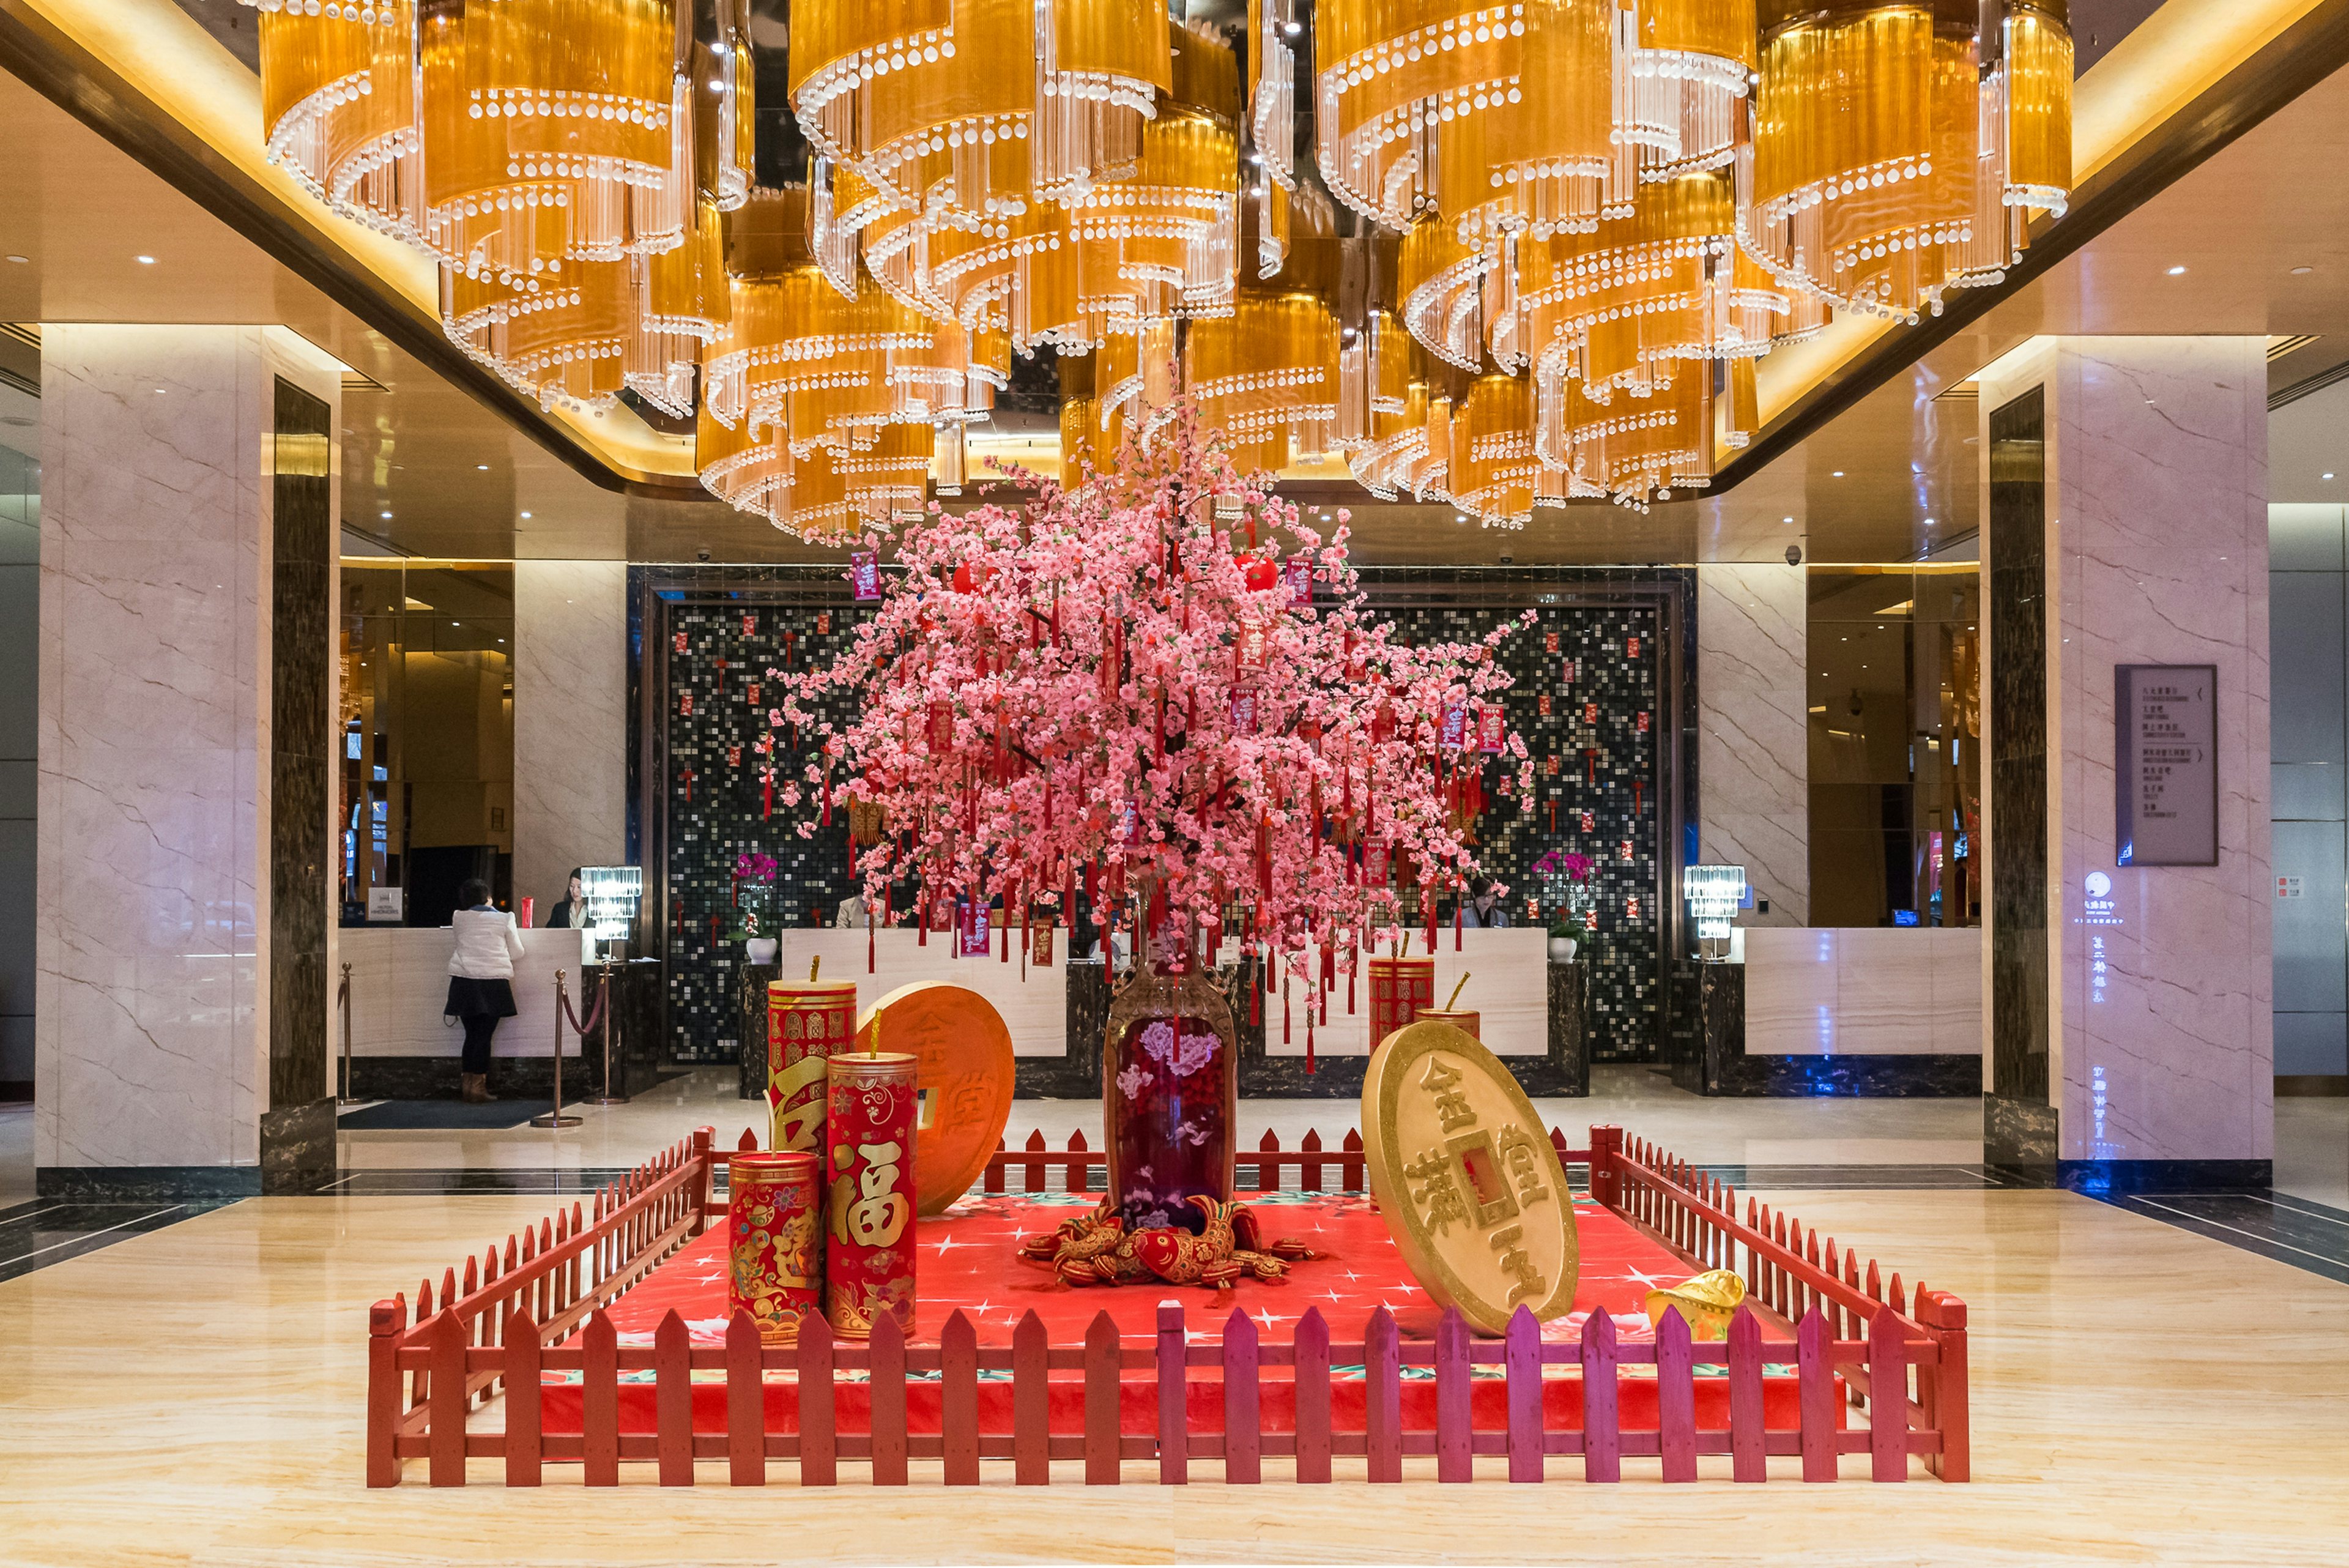 The Spring Festival is one of the most important occasions for luxury hotel brands in China to engage with customers, attract new guests and nurture long-term relationships. Photo: gnoparus / Shutterstock